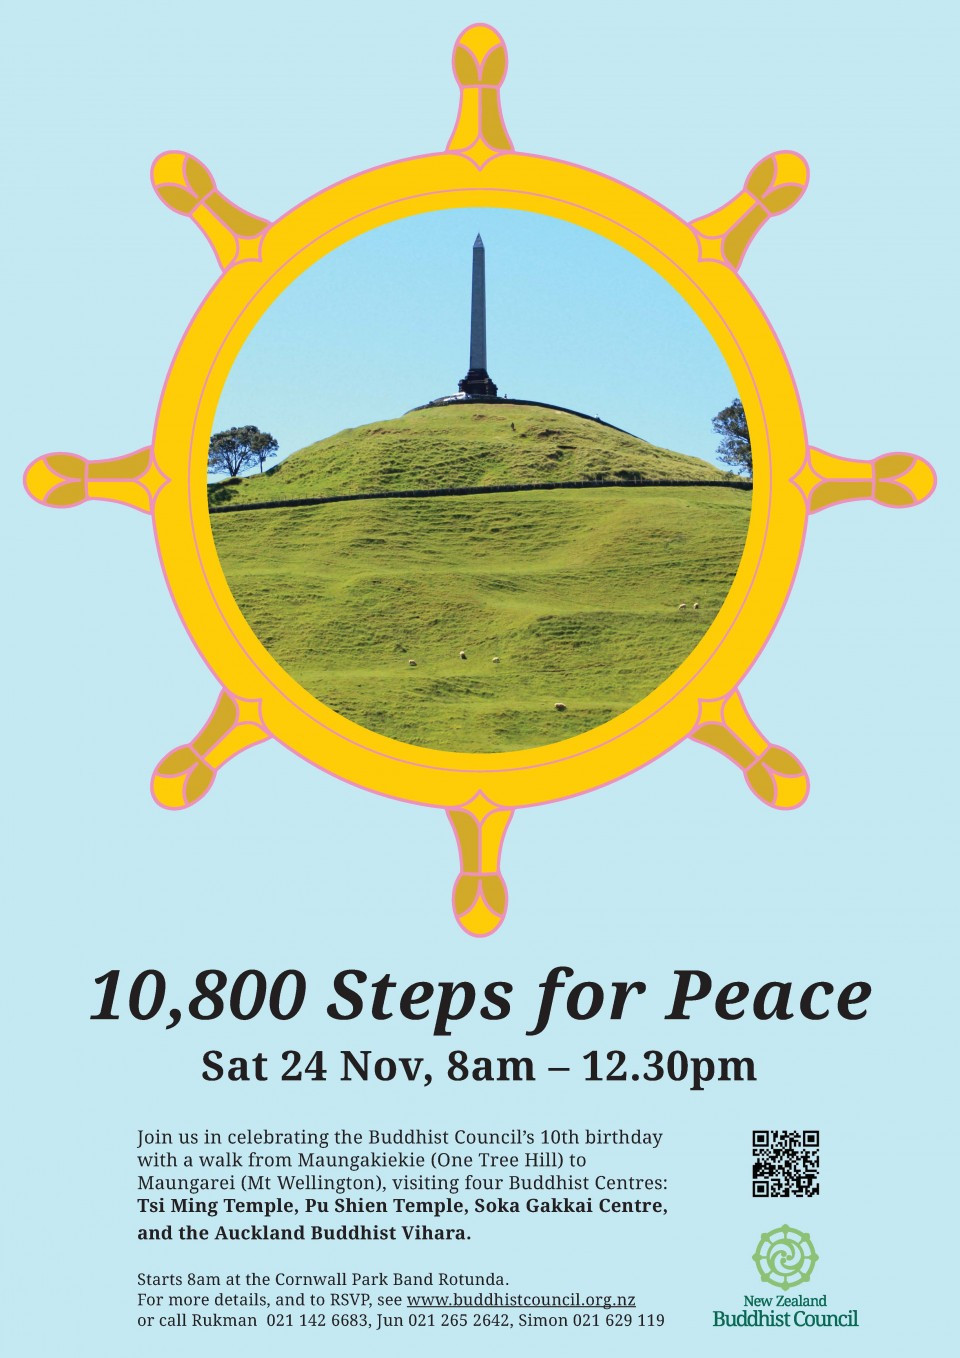 10800 Steps for peace